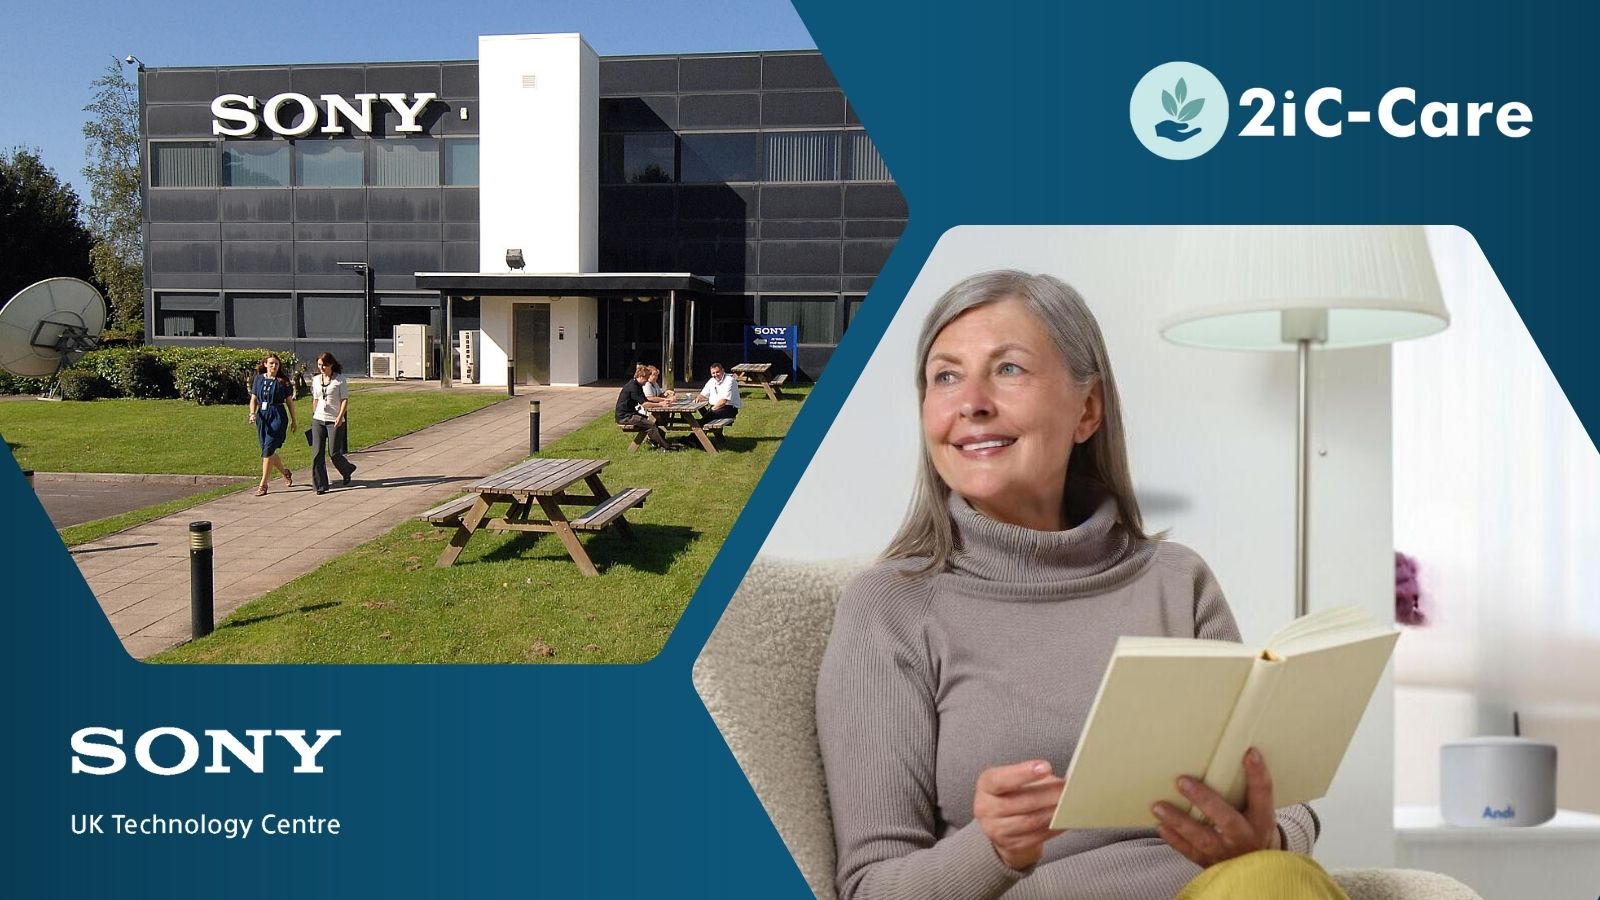 Sony UK Technology Centre & 2iC-Care Manufacturing Agreement